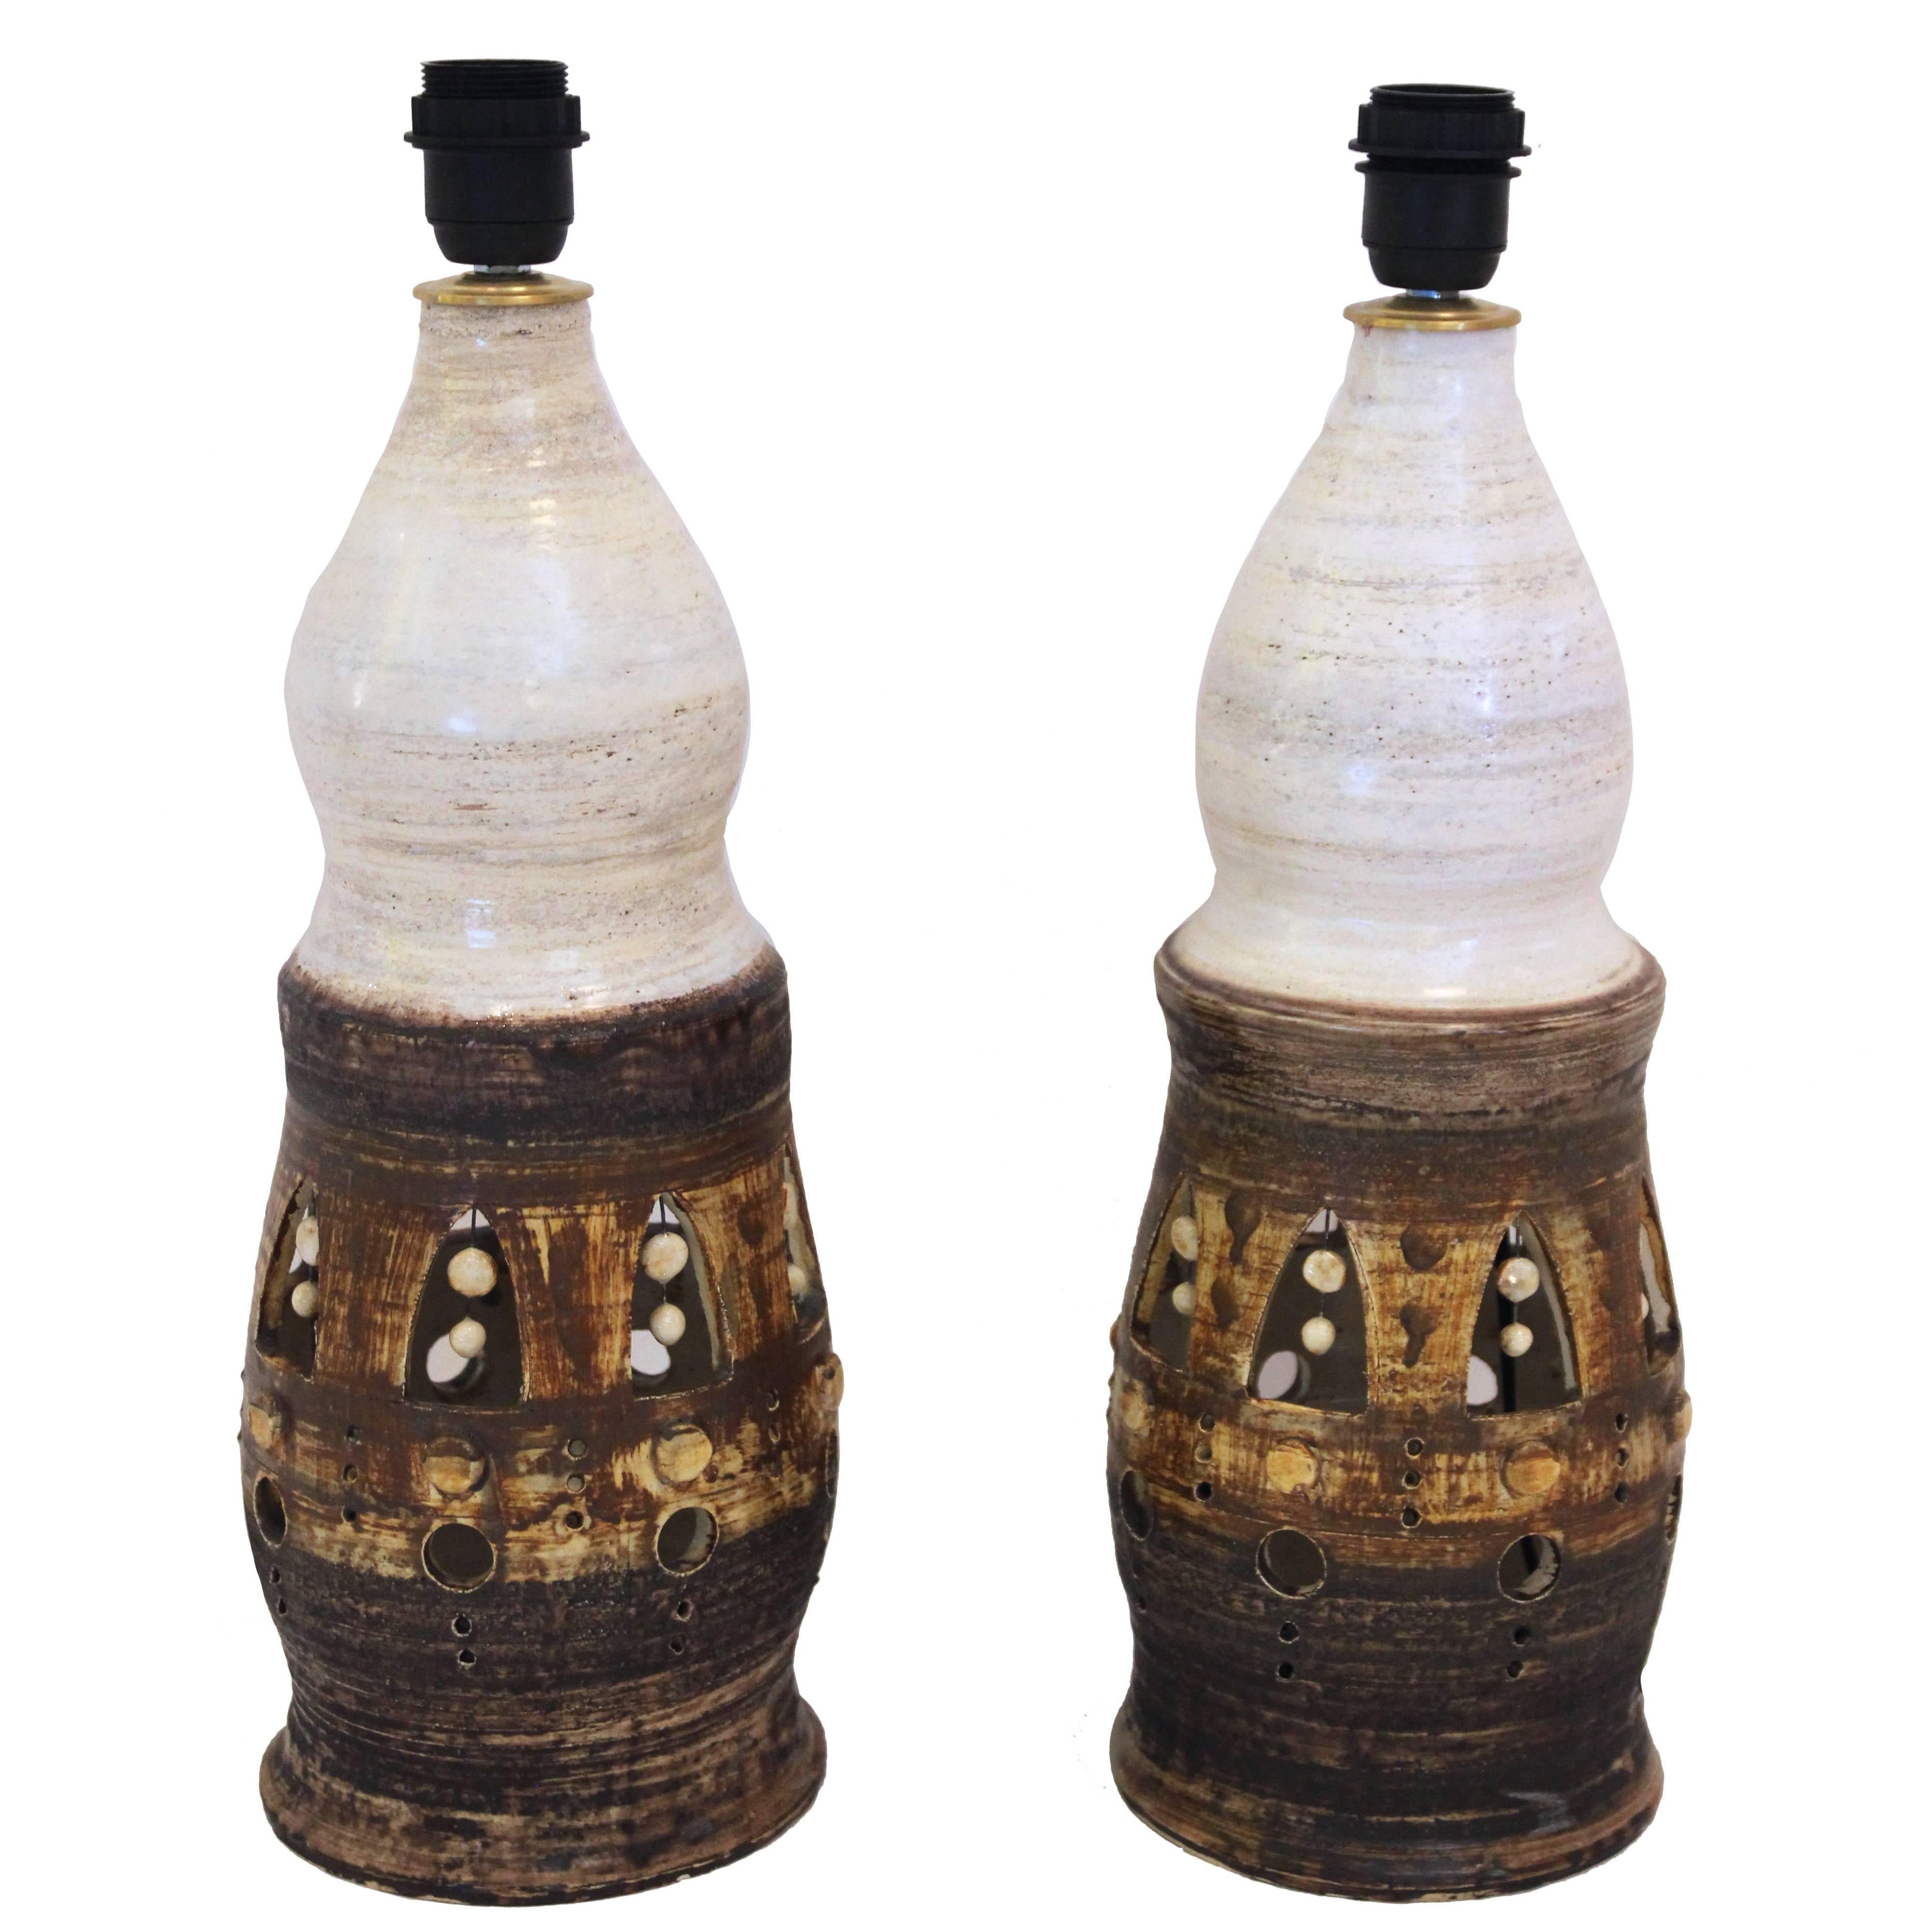 Georges Pelletier, Pair of Table Lamps, Glazed Ceramic, France, circa 1980